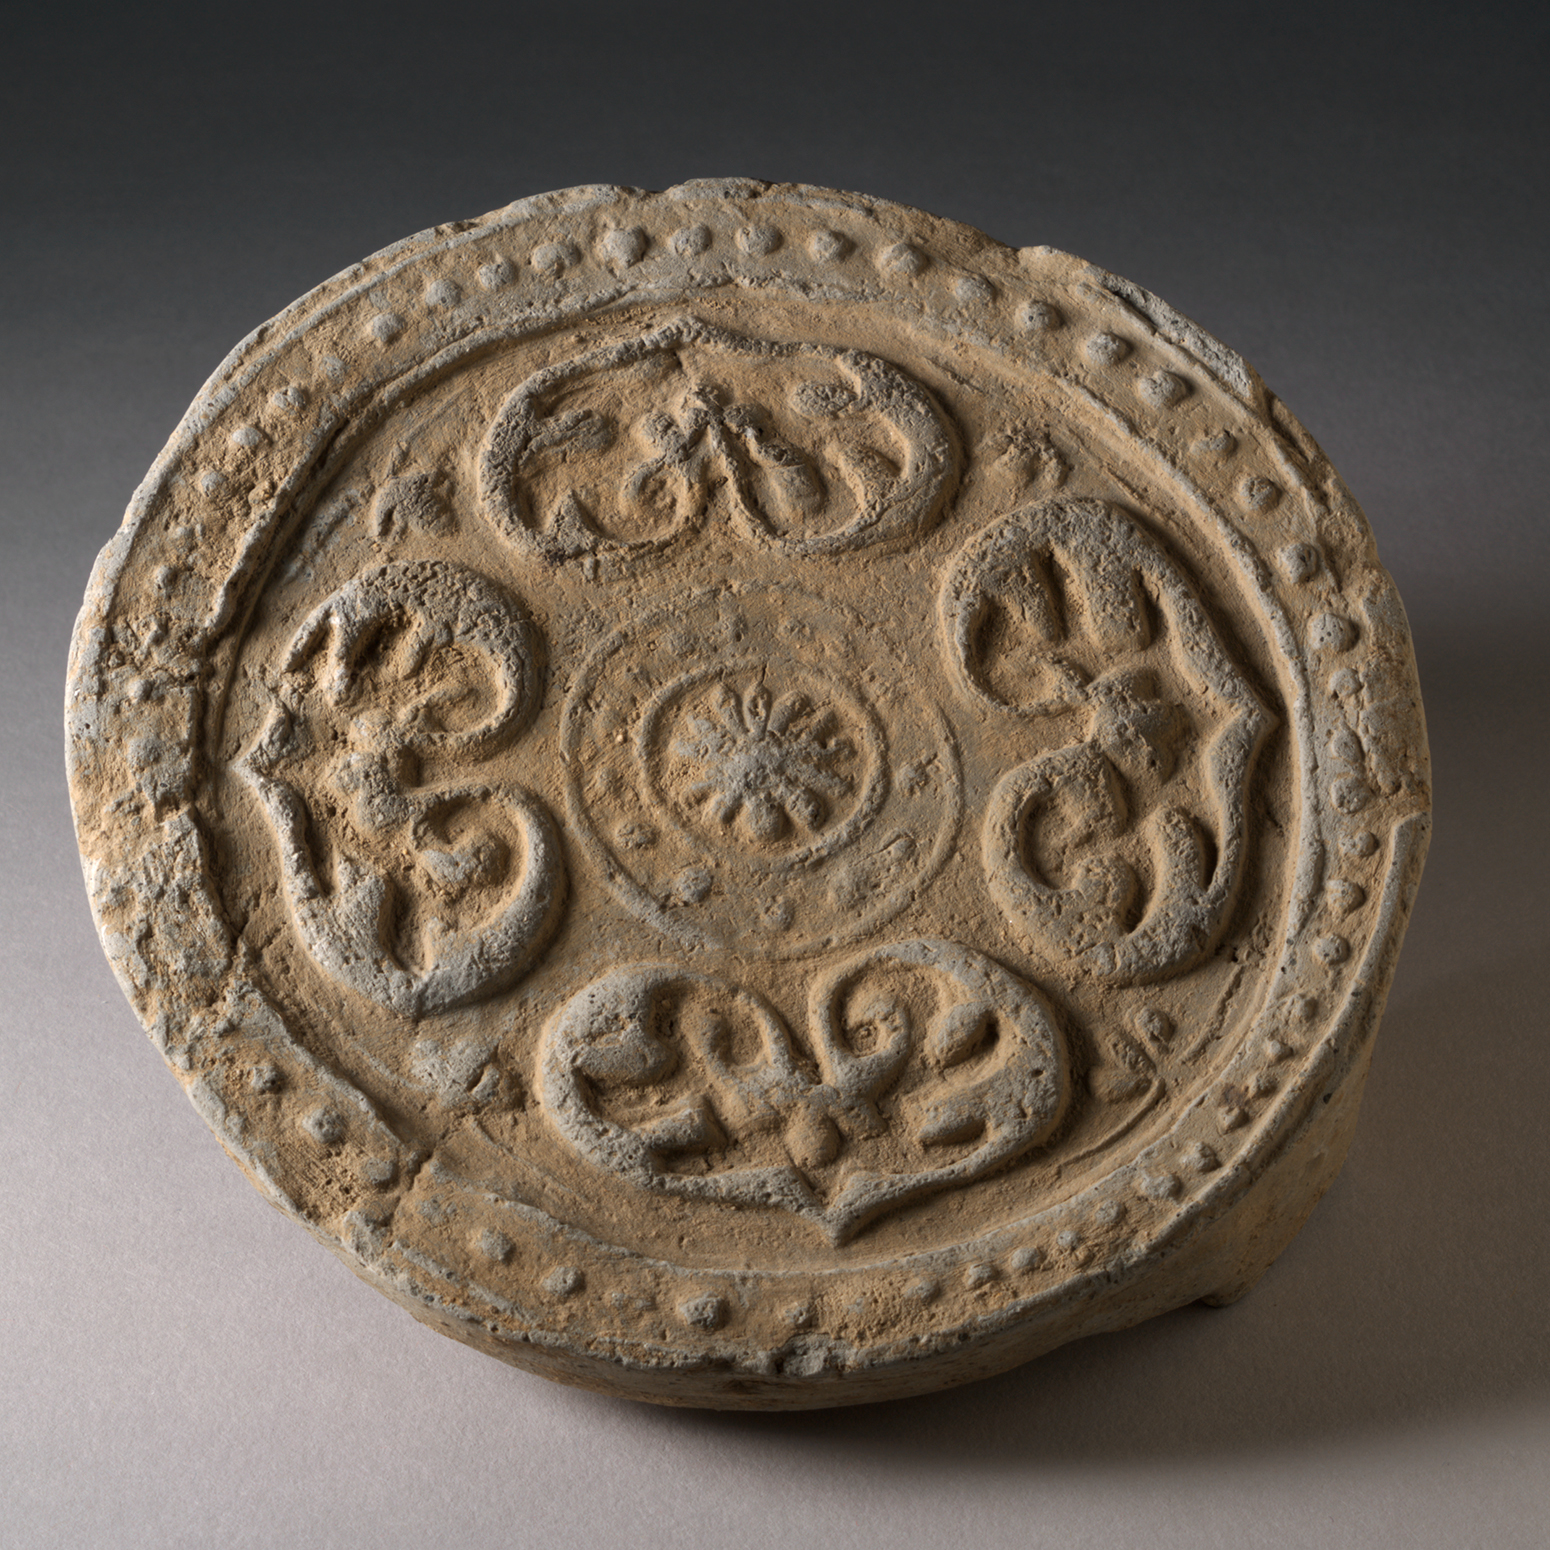 A round brown disc with an incised decorative design